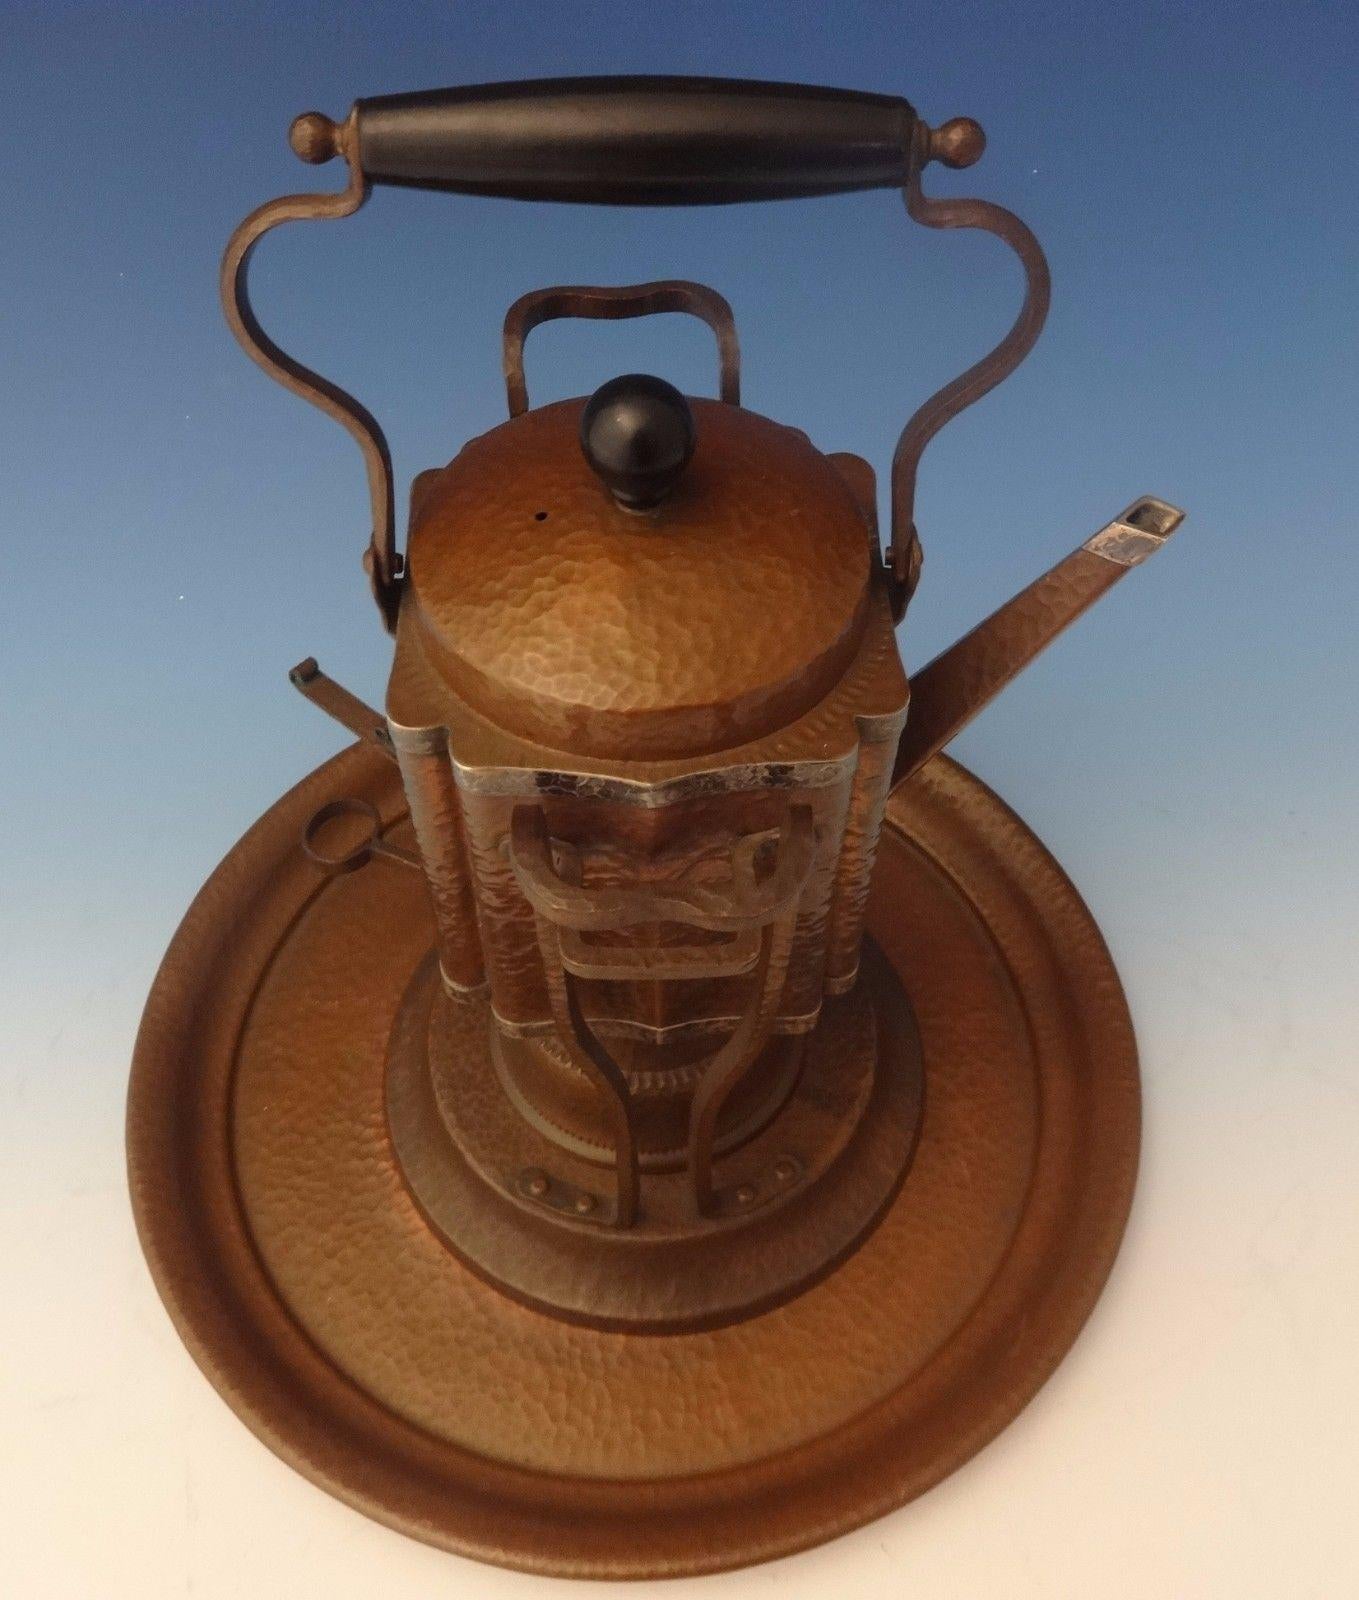 Joseph Heinrichs Arts & Crafts kettle on stand and tray was handmade by Joseph Heinrichs. The piece is made of copper and with applied sterling silver, it's hand-hammered, and it dates from circa 1905. The measurements for the piece are 13 x 8. It